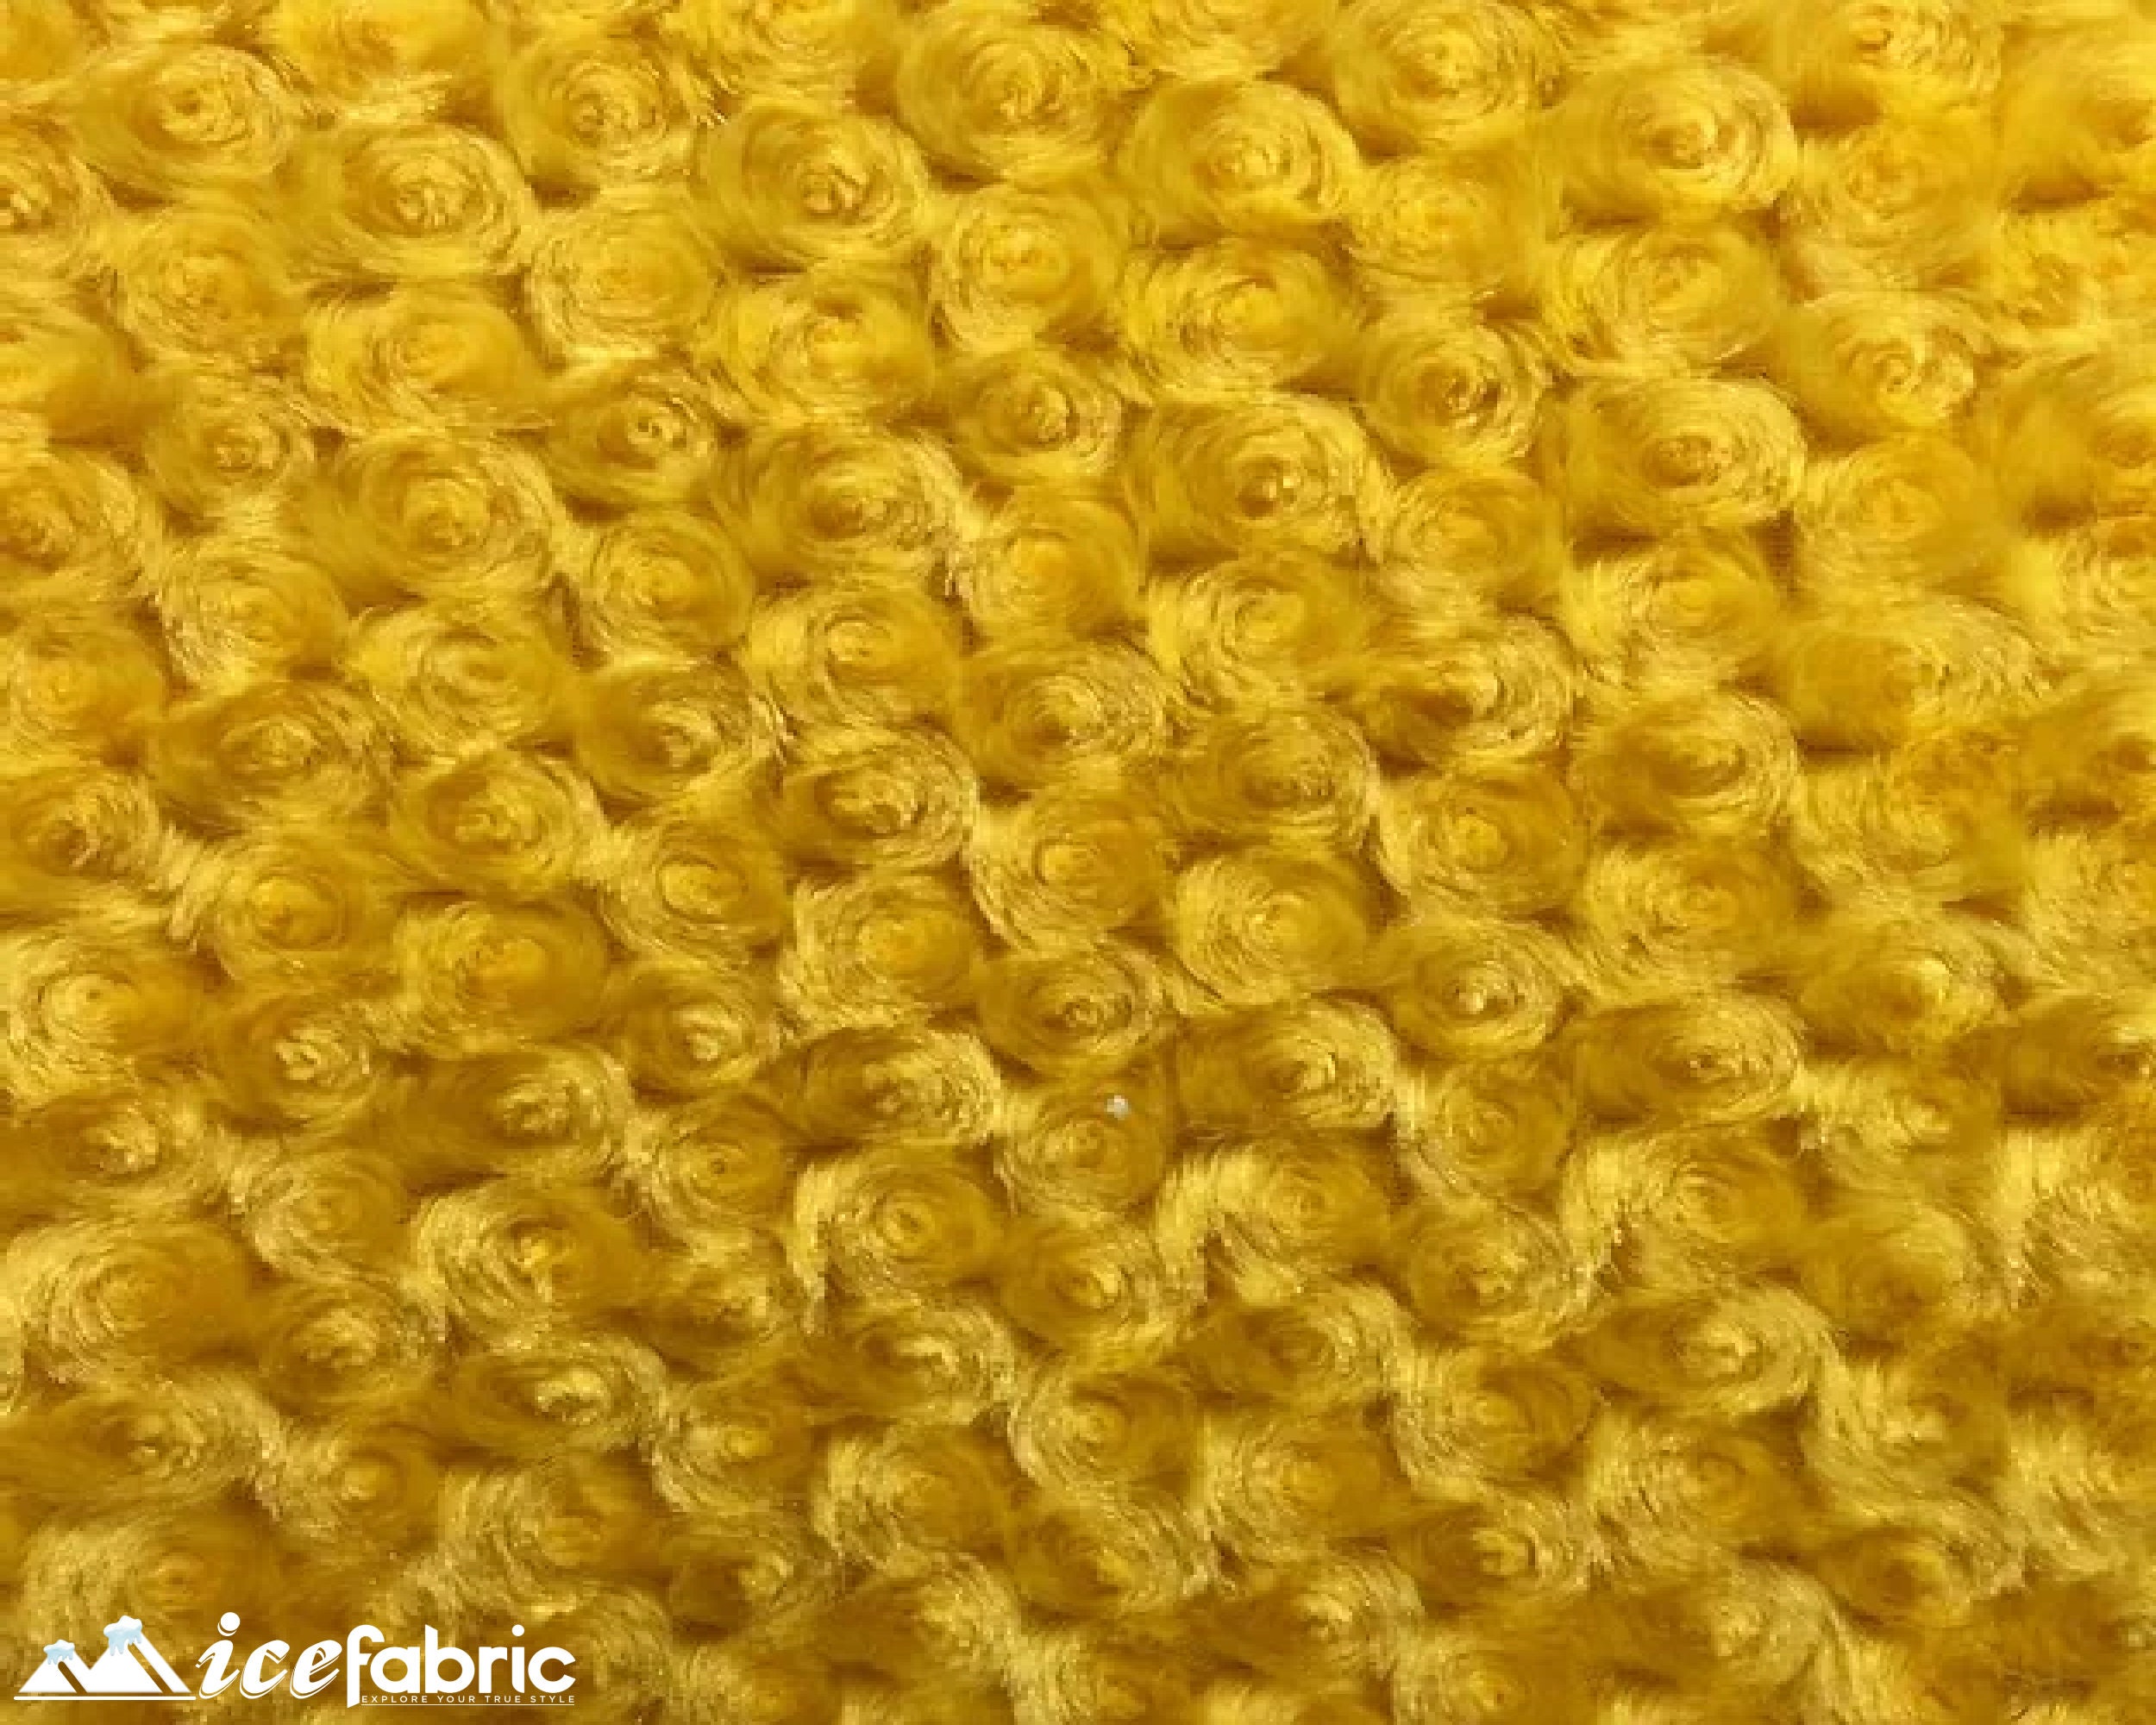 RARE Canary Yellow Antique Italian Glass Seed Beads 2mm Vivid Retro-yellow Glass  Beads for Embroidery & Jewelry Making CV235 